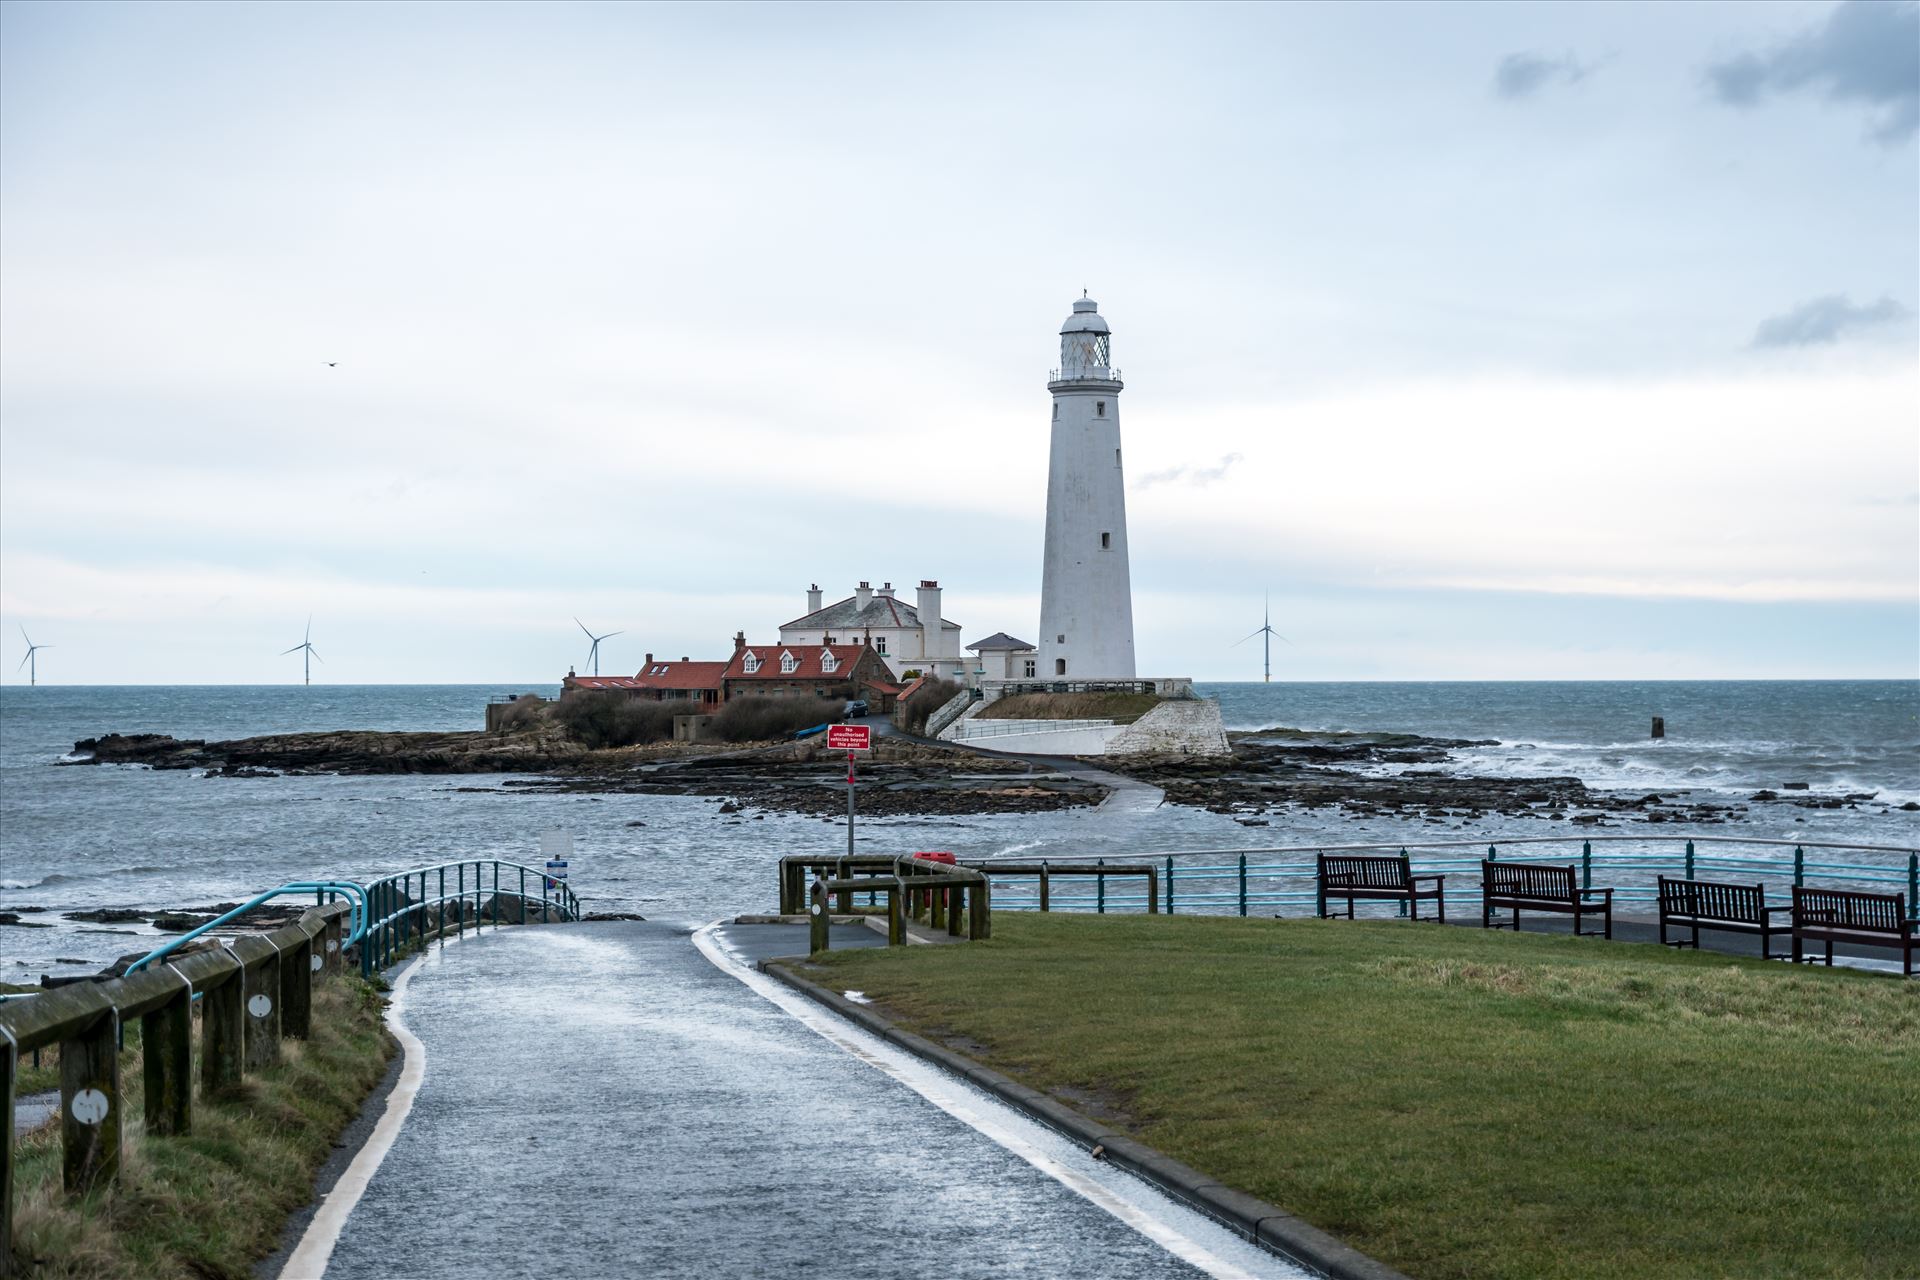 St Mary\'s Island, Whitley Bay. - St. Mary's Island was originally called Bates Island, Hartley Bates or Bates Hill as it was originally owned by the Bates family.

The lighthouse continued to function until 1984, when it was taken out of service. The lighthouse is now open to visitors. by Graham Dobson Photography